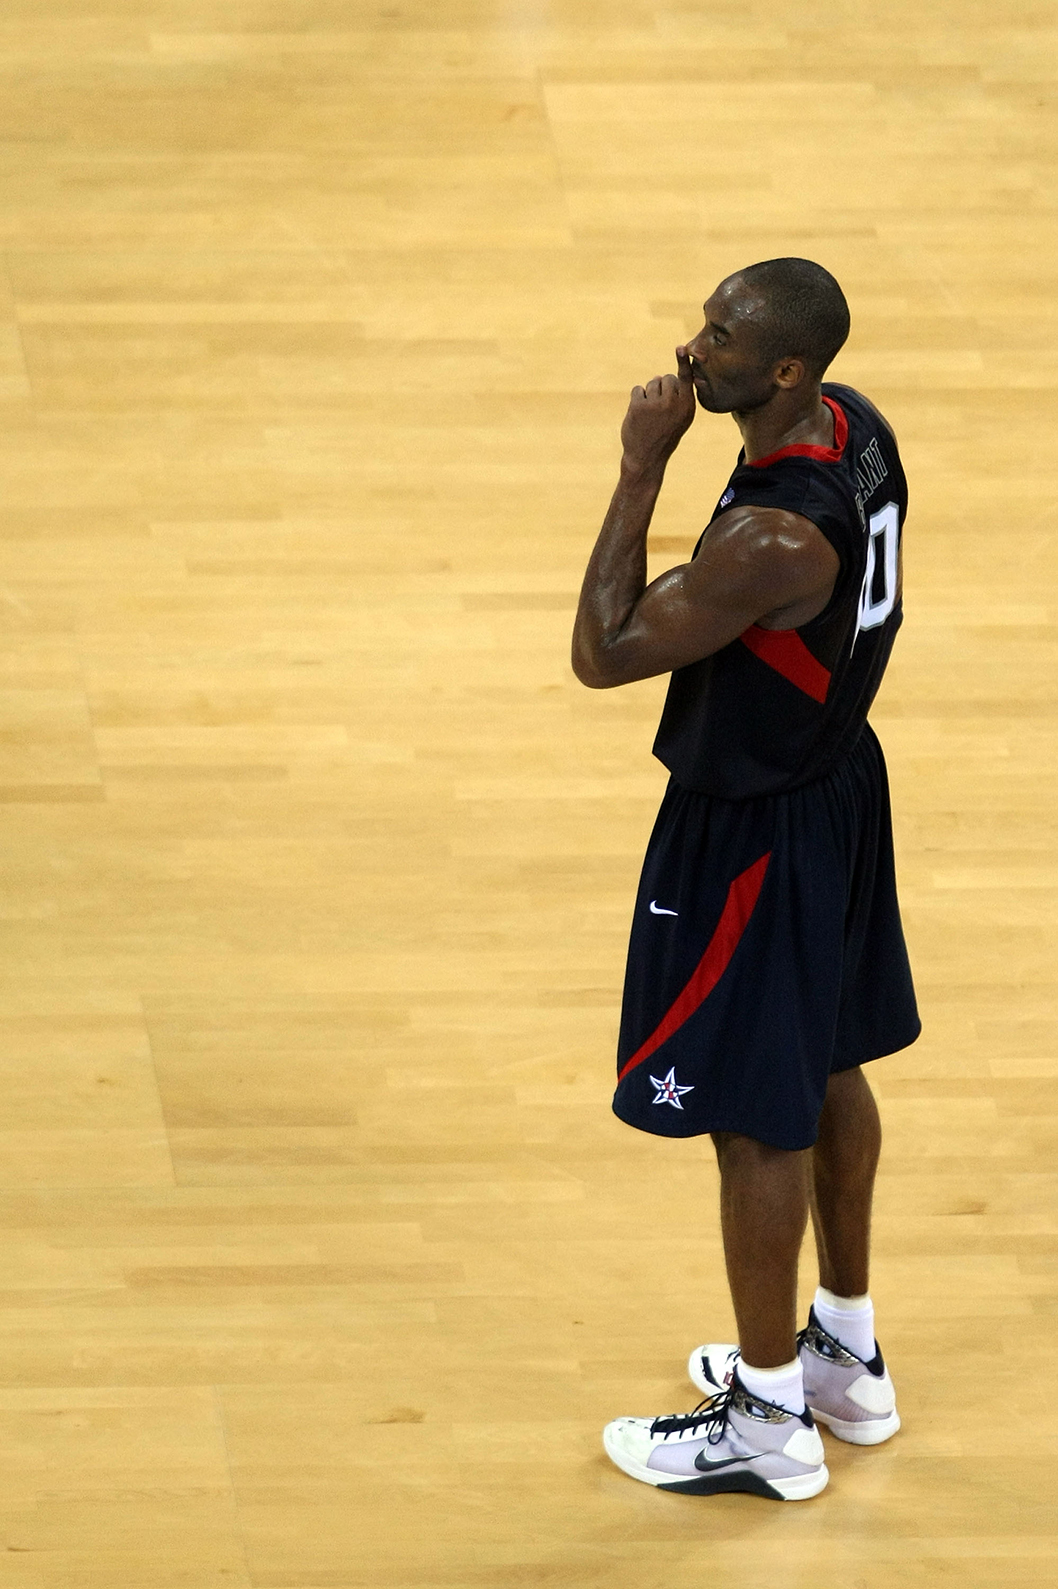 Sole Survivors: Kobe Bryant and the Nike Hyperdunk's Legacy